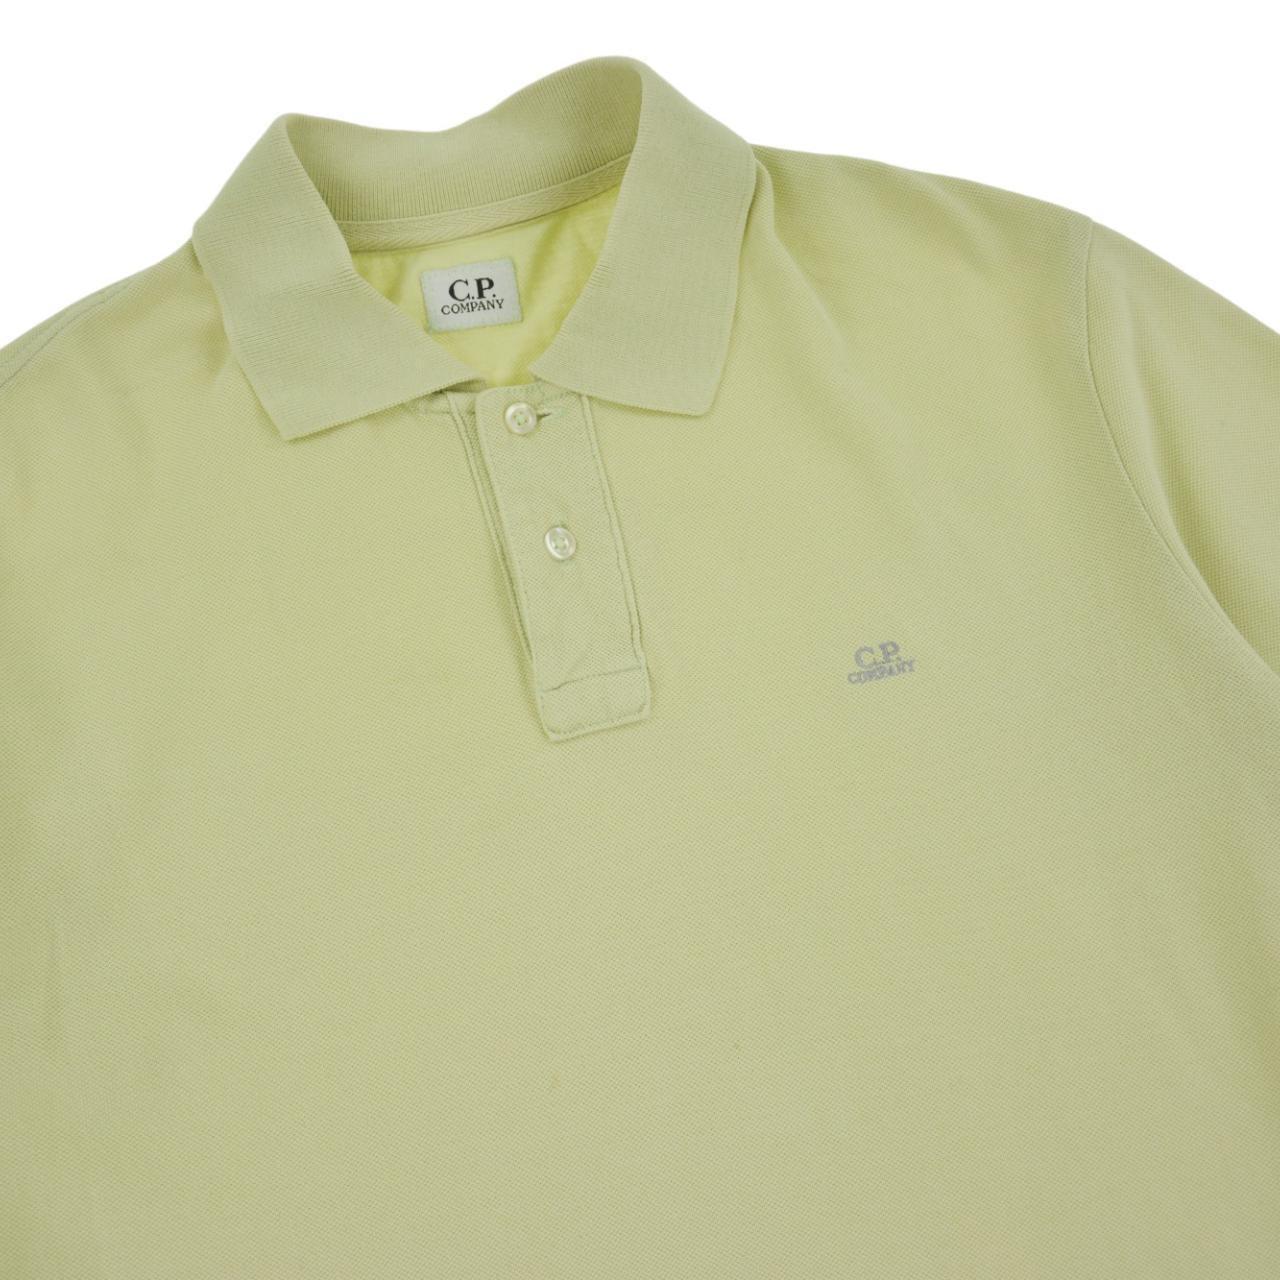 Vintage CP Company Polo Shirt Size M - Known Source